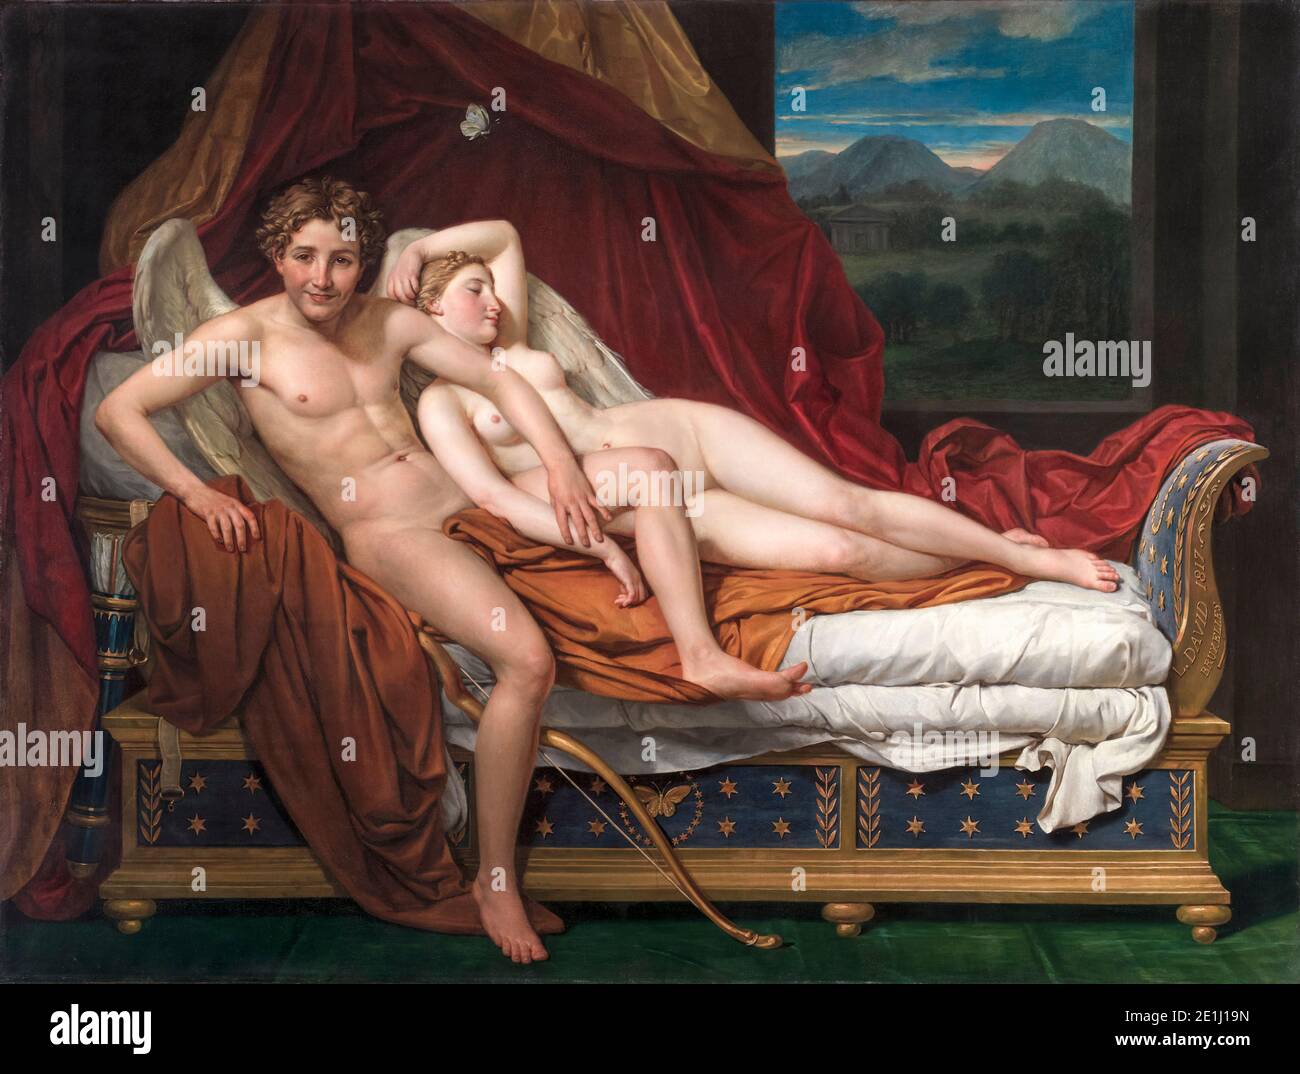 Cupid and Psyche, Neoclassical painting by Jacques-Louis David, 1817 Stock Photo